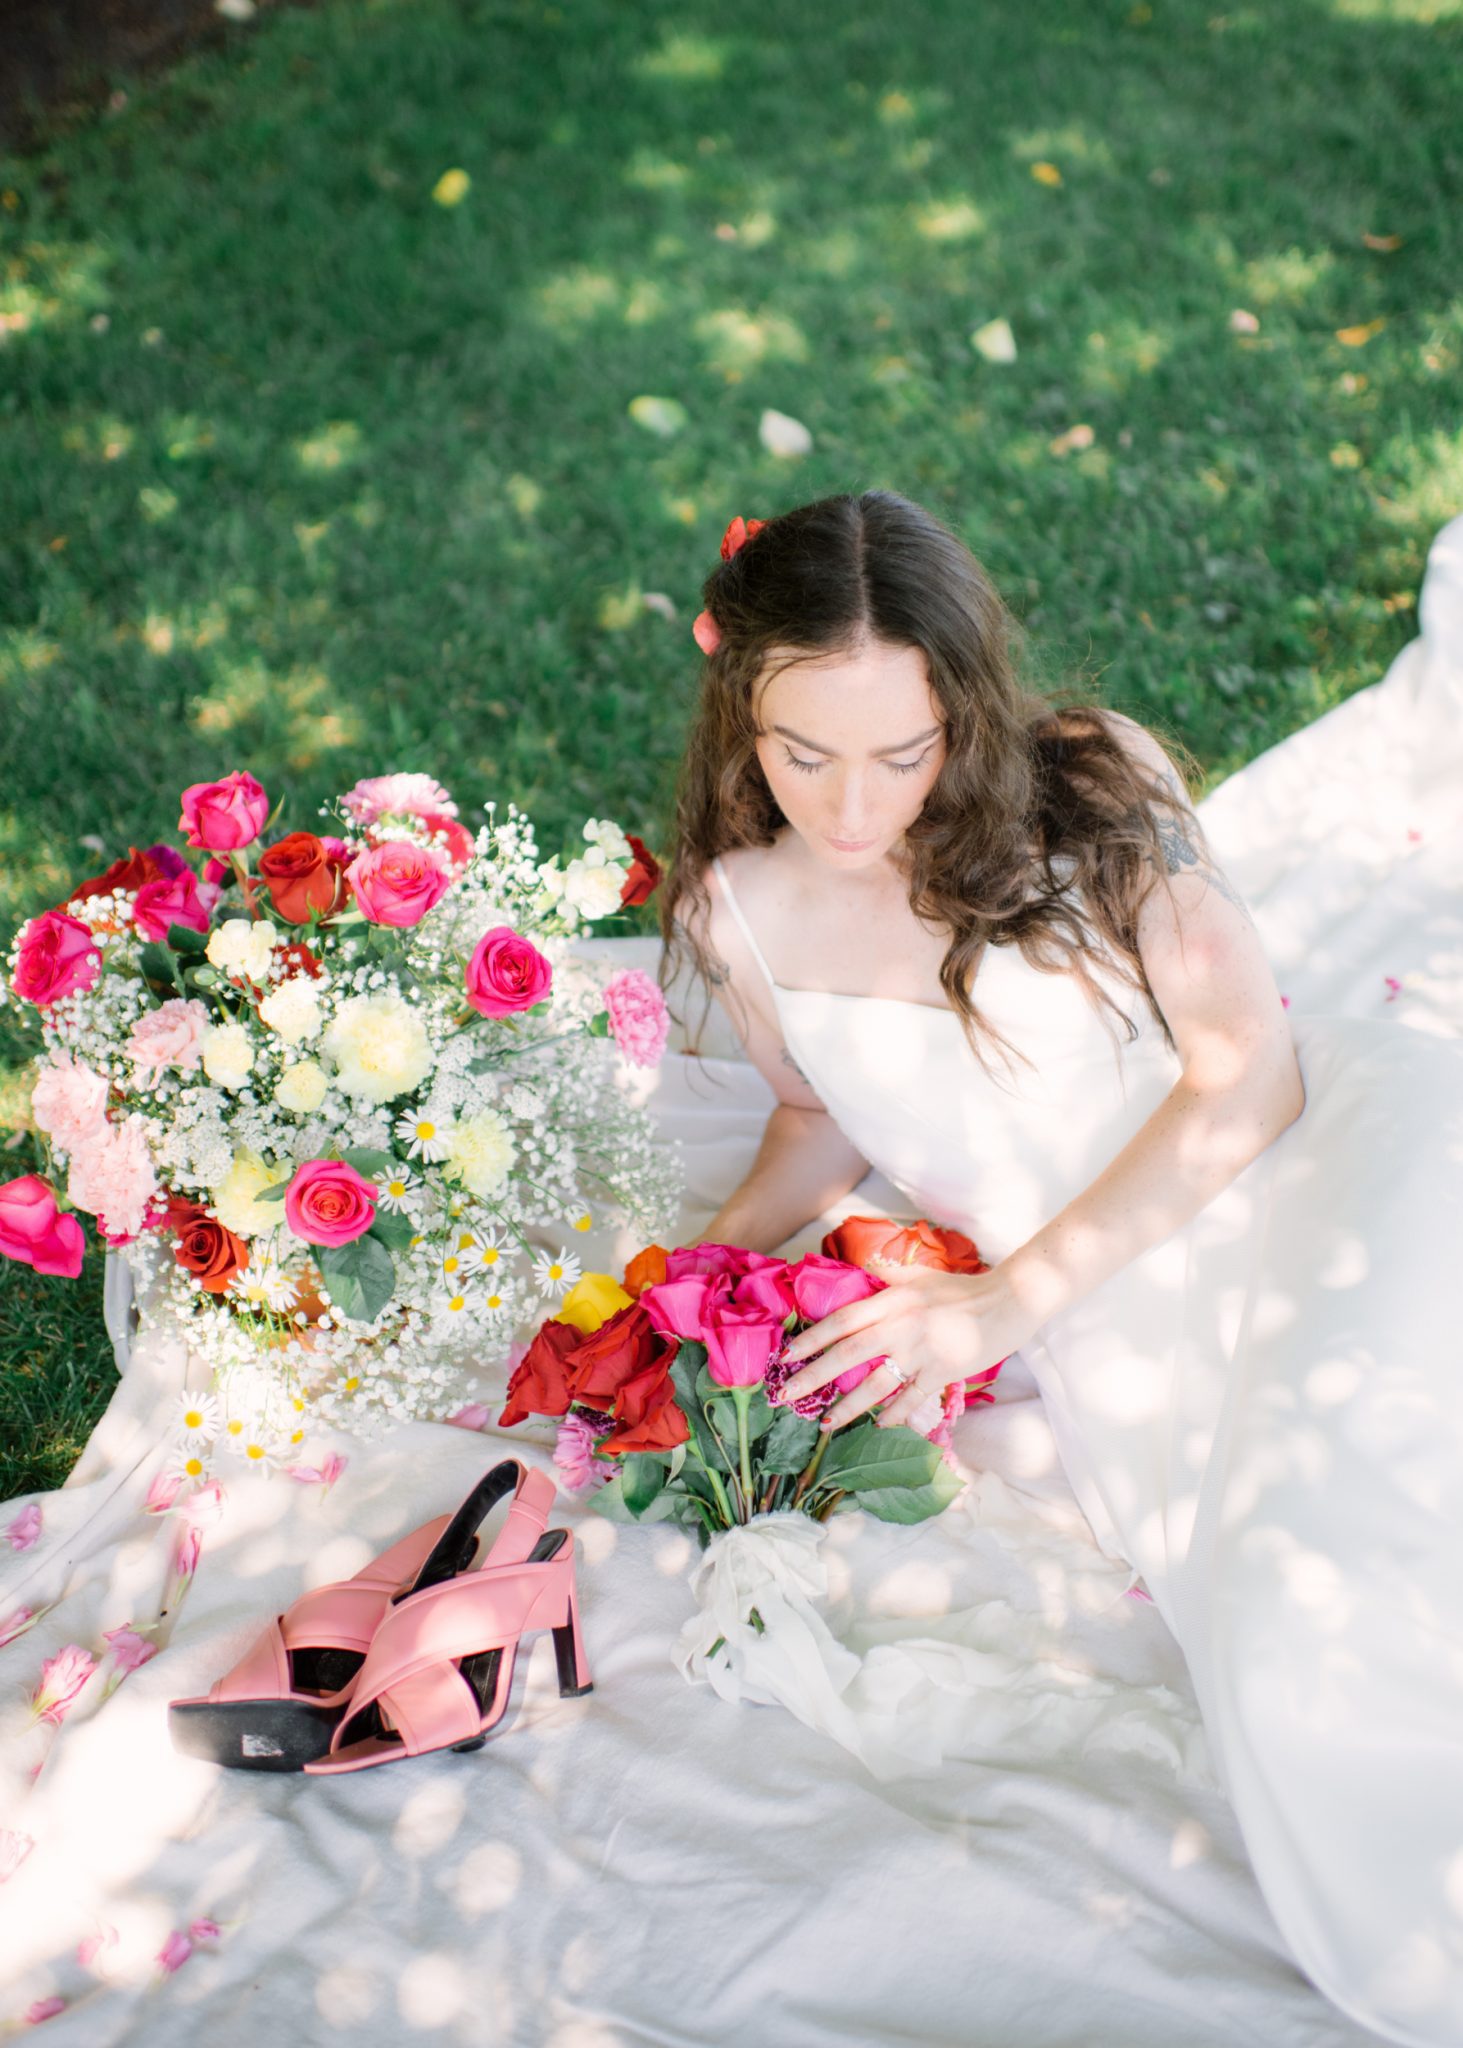 Hot Pink Perfection for this Picnic in the Park Valentine's Day Inspiration Hot Pink Perfection for this Picnic in the Park Valentine's Day Inspiration Featured by Brontë Bride, roses, picnic inspiration